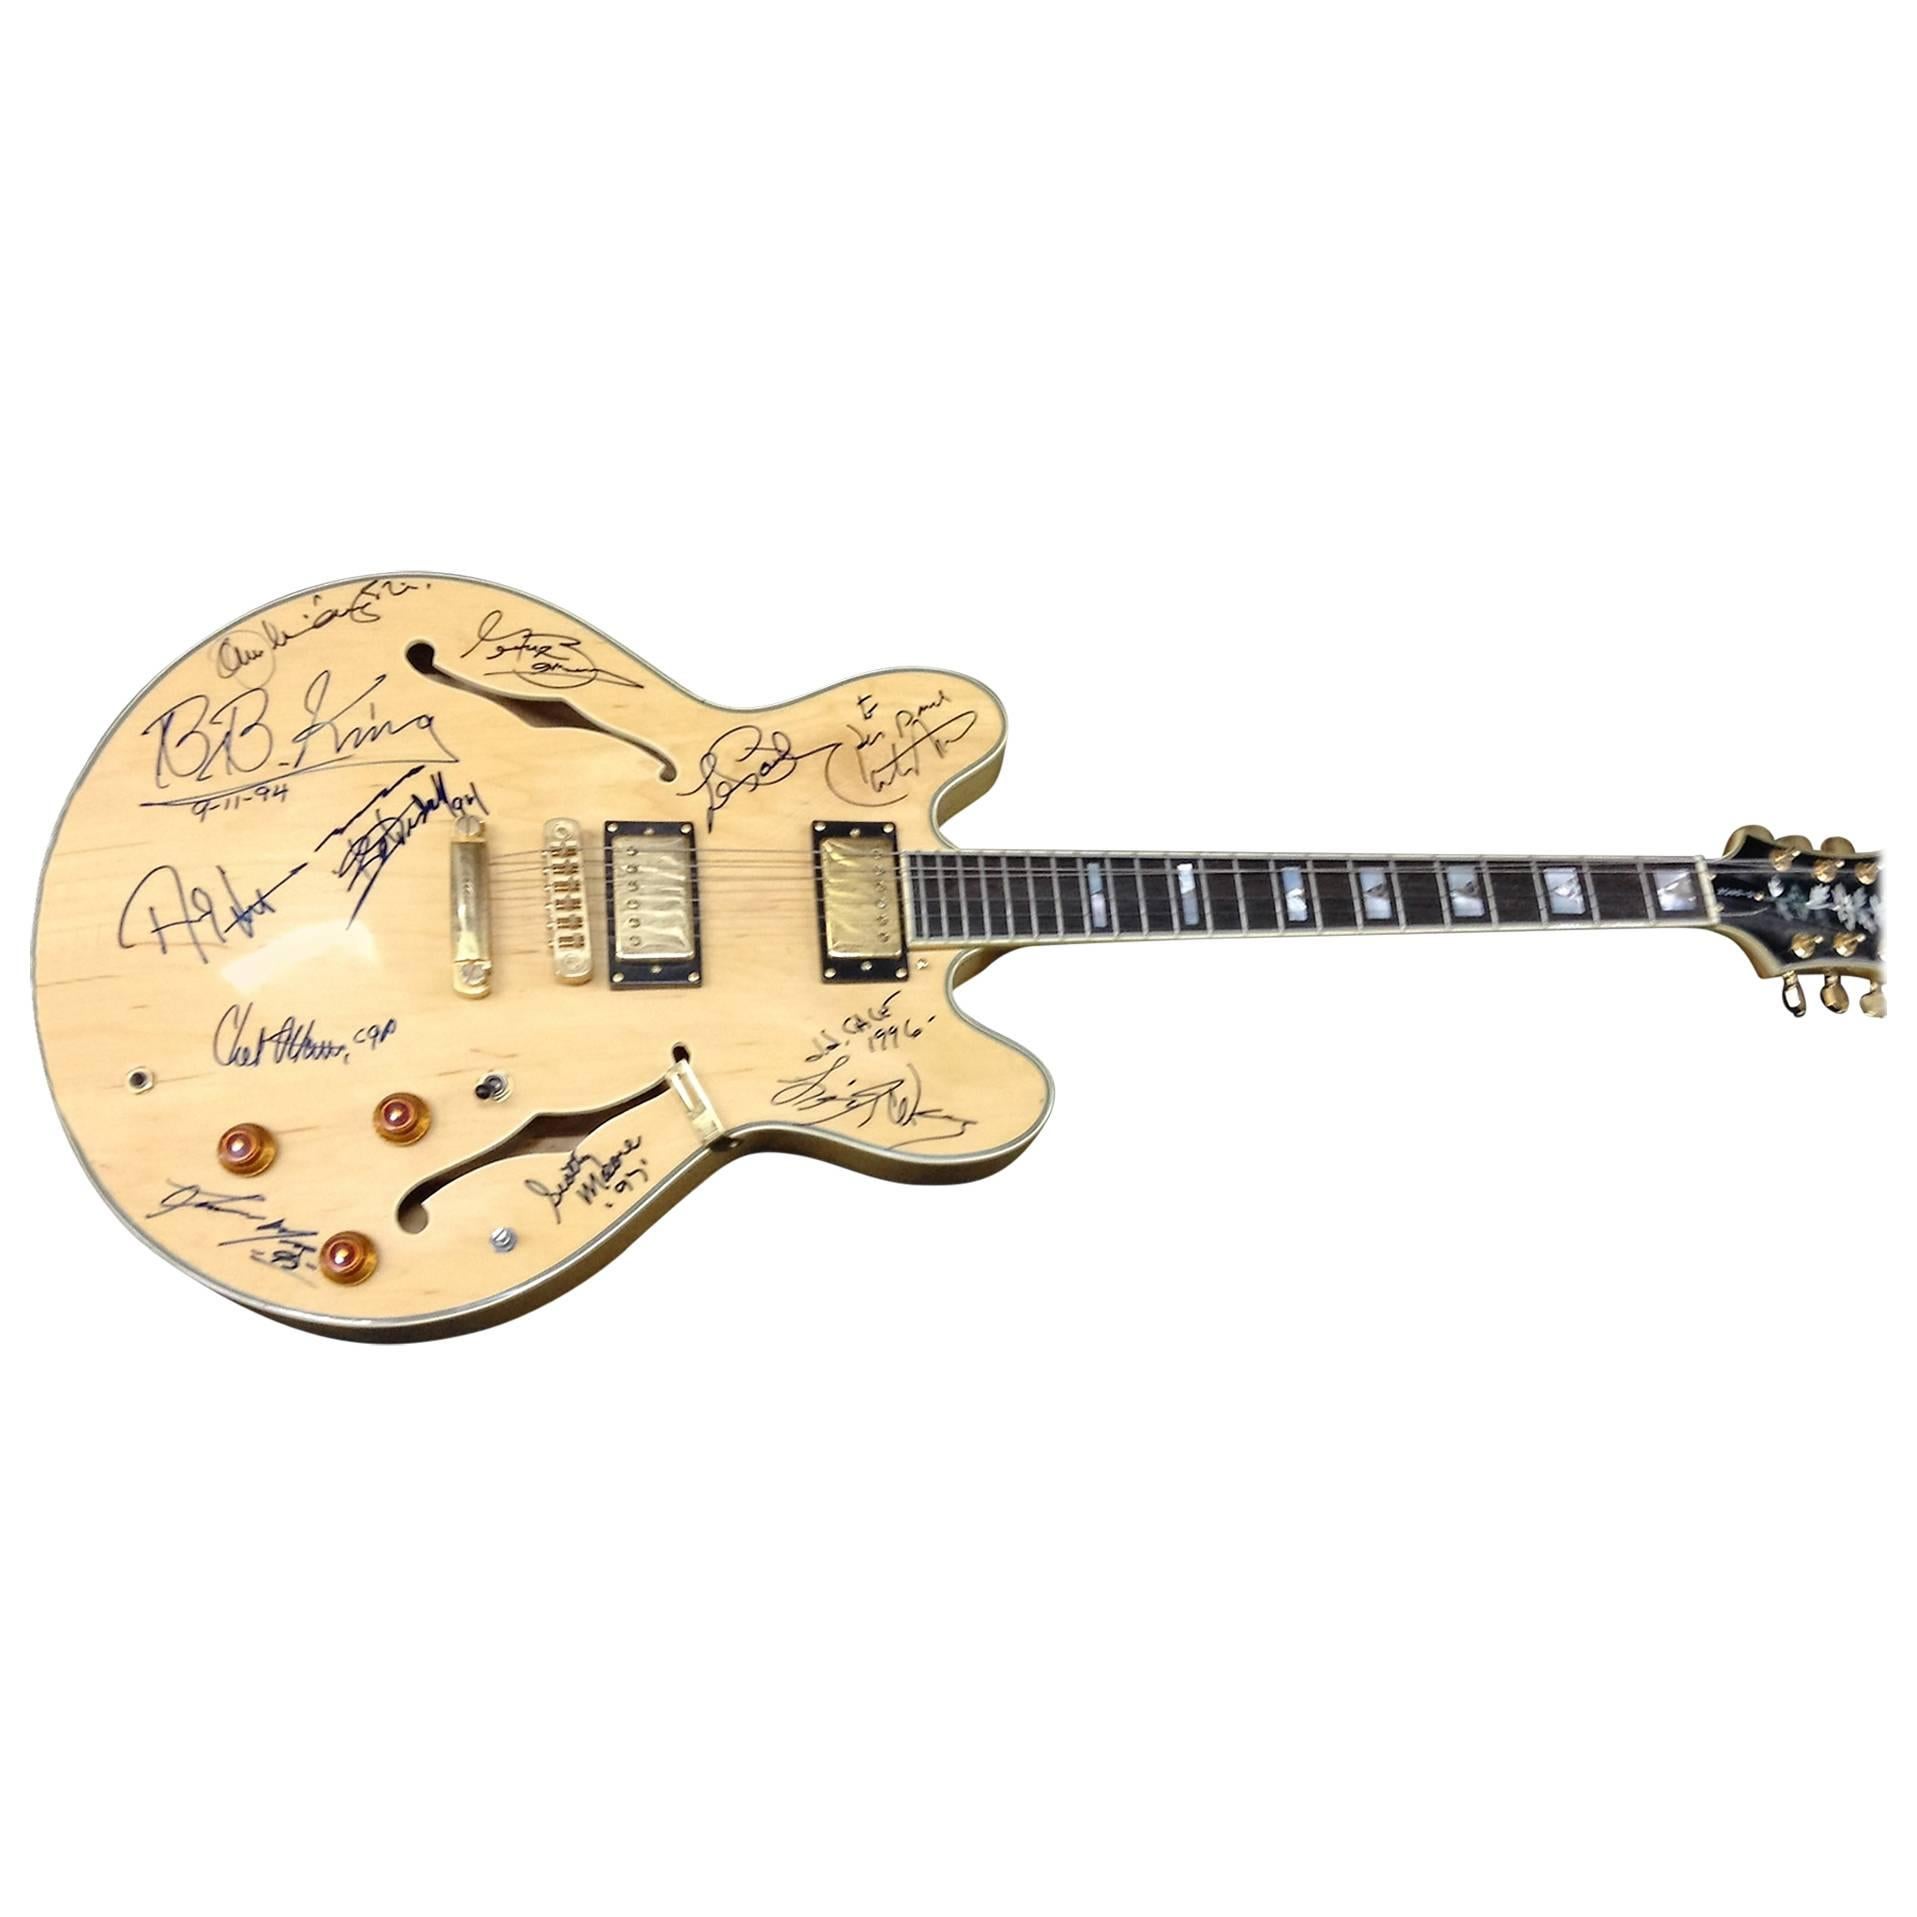 Rock and Roll Legends Autographed Guitar For Sale